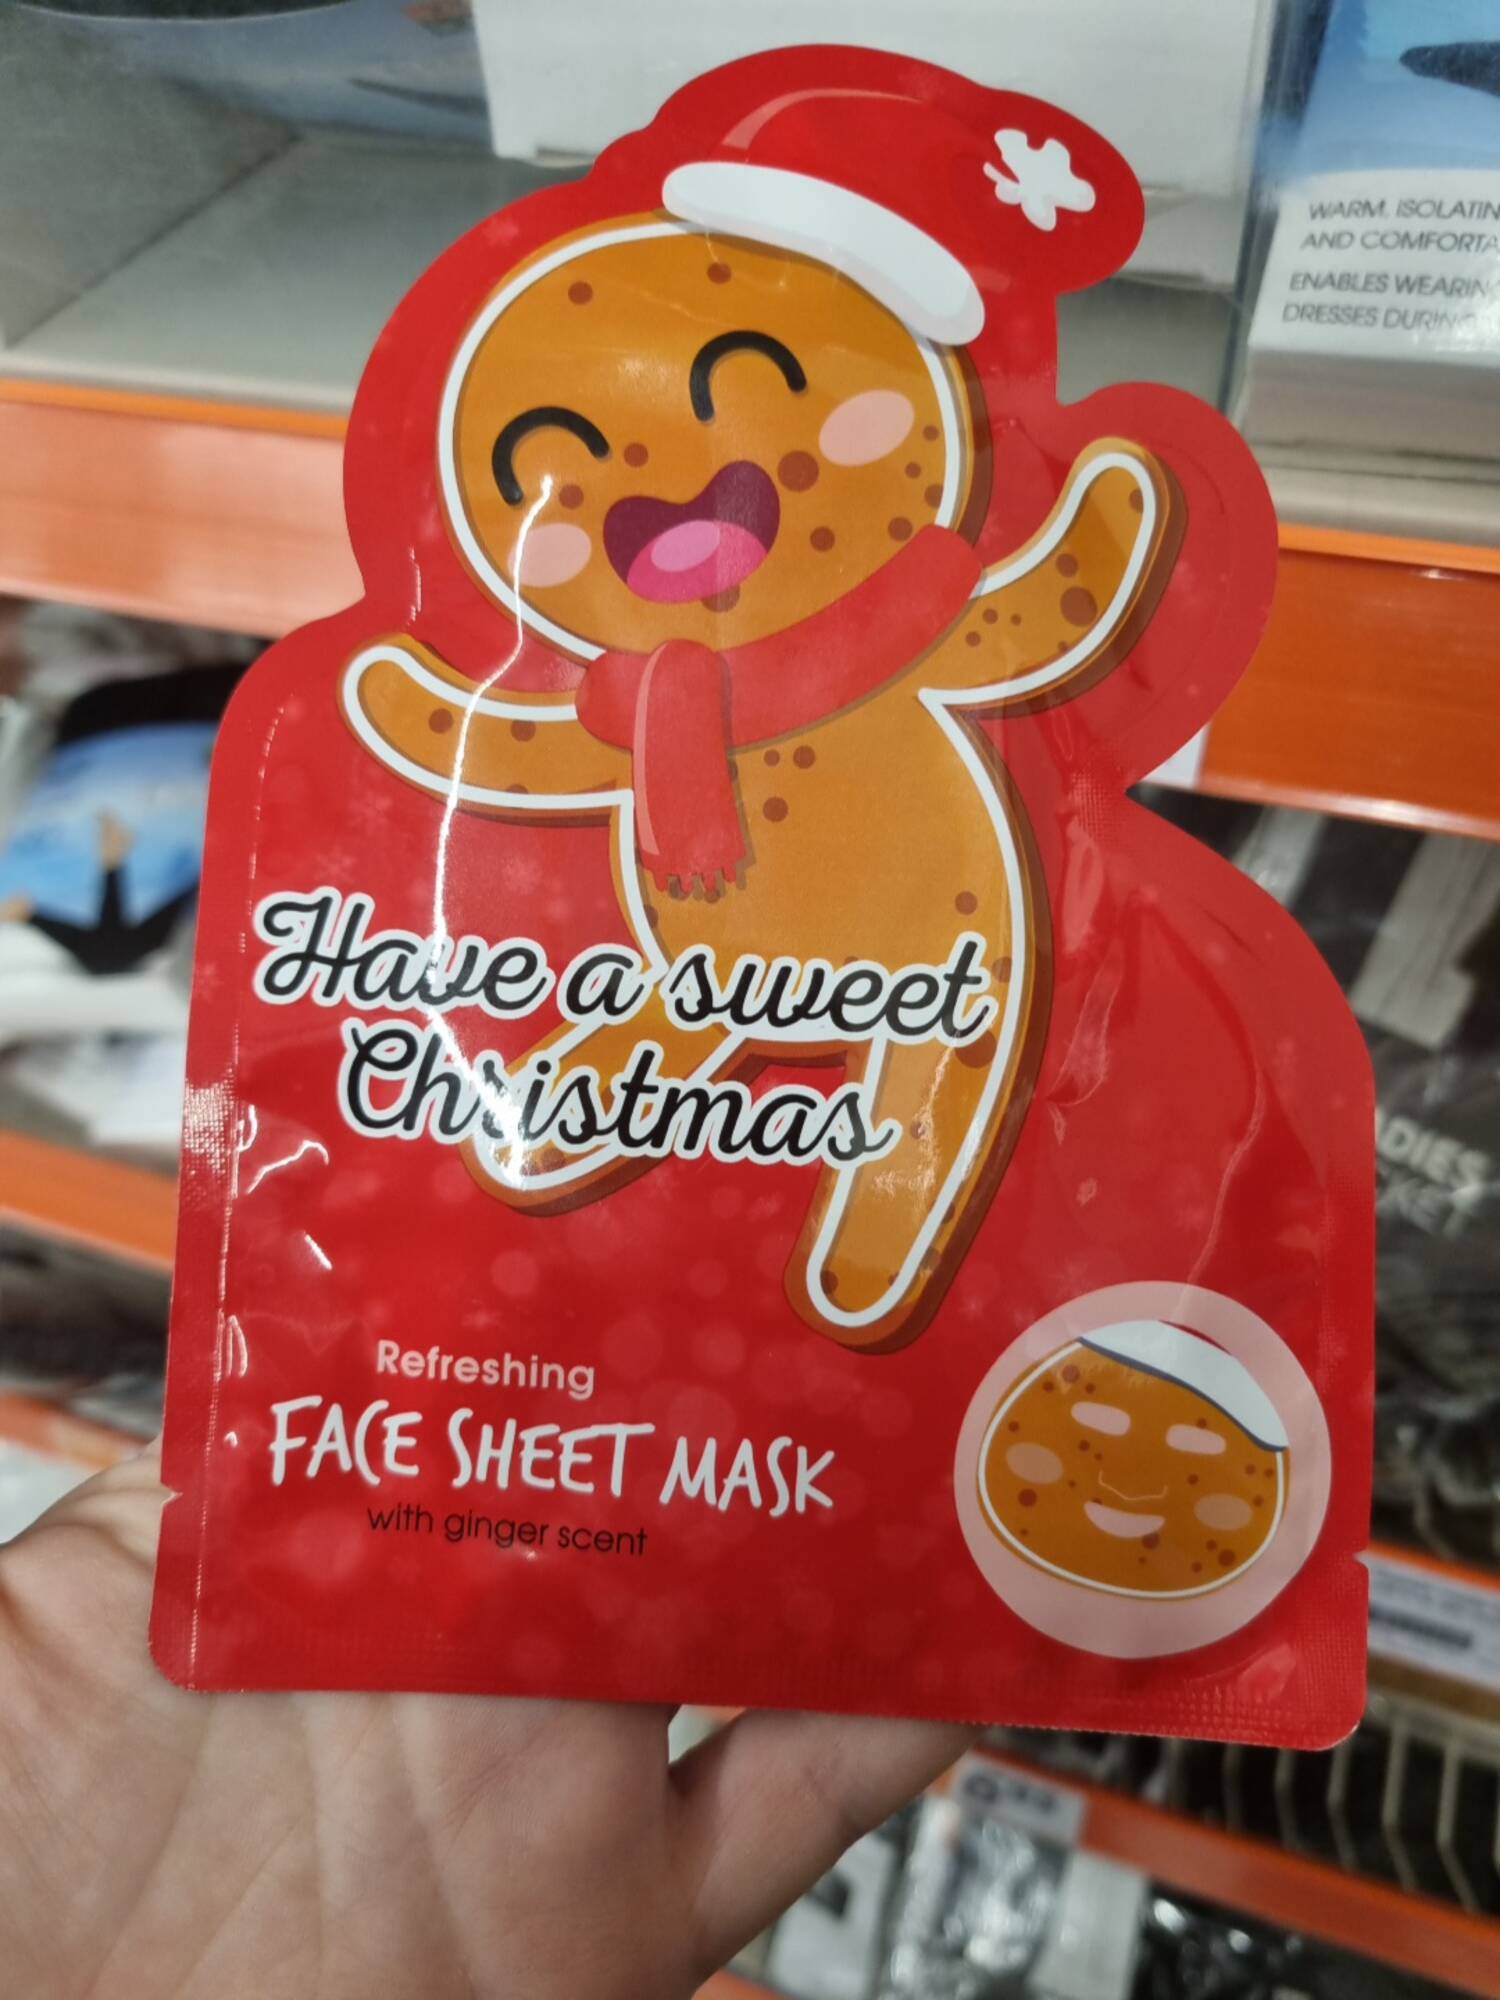 MAXBRANDS - Have a sweet christmas - Face sheet mask